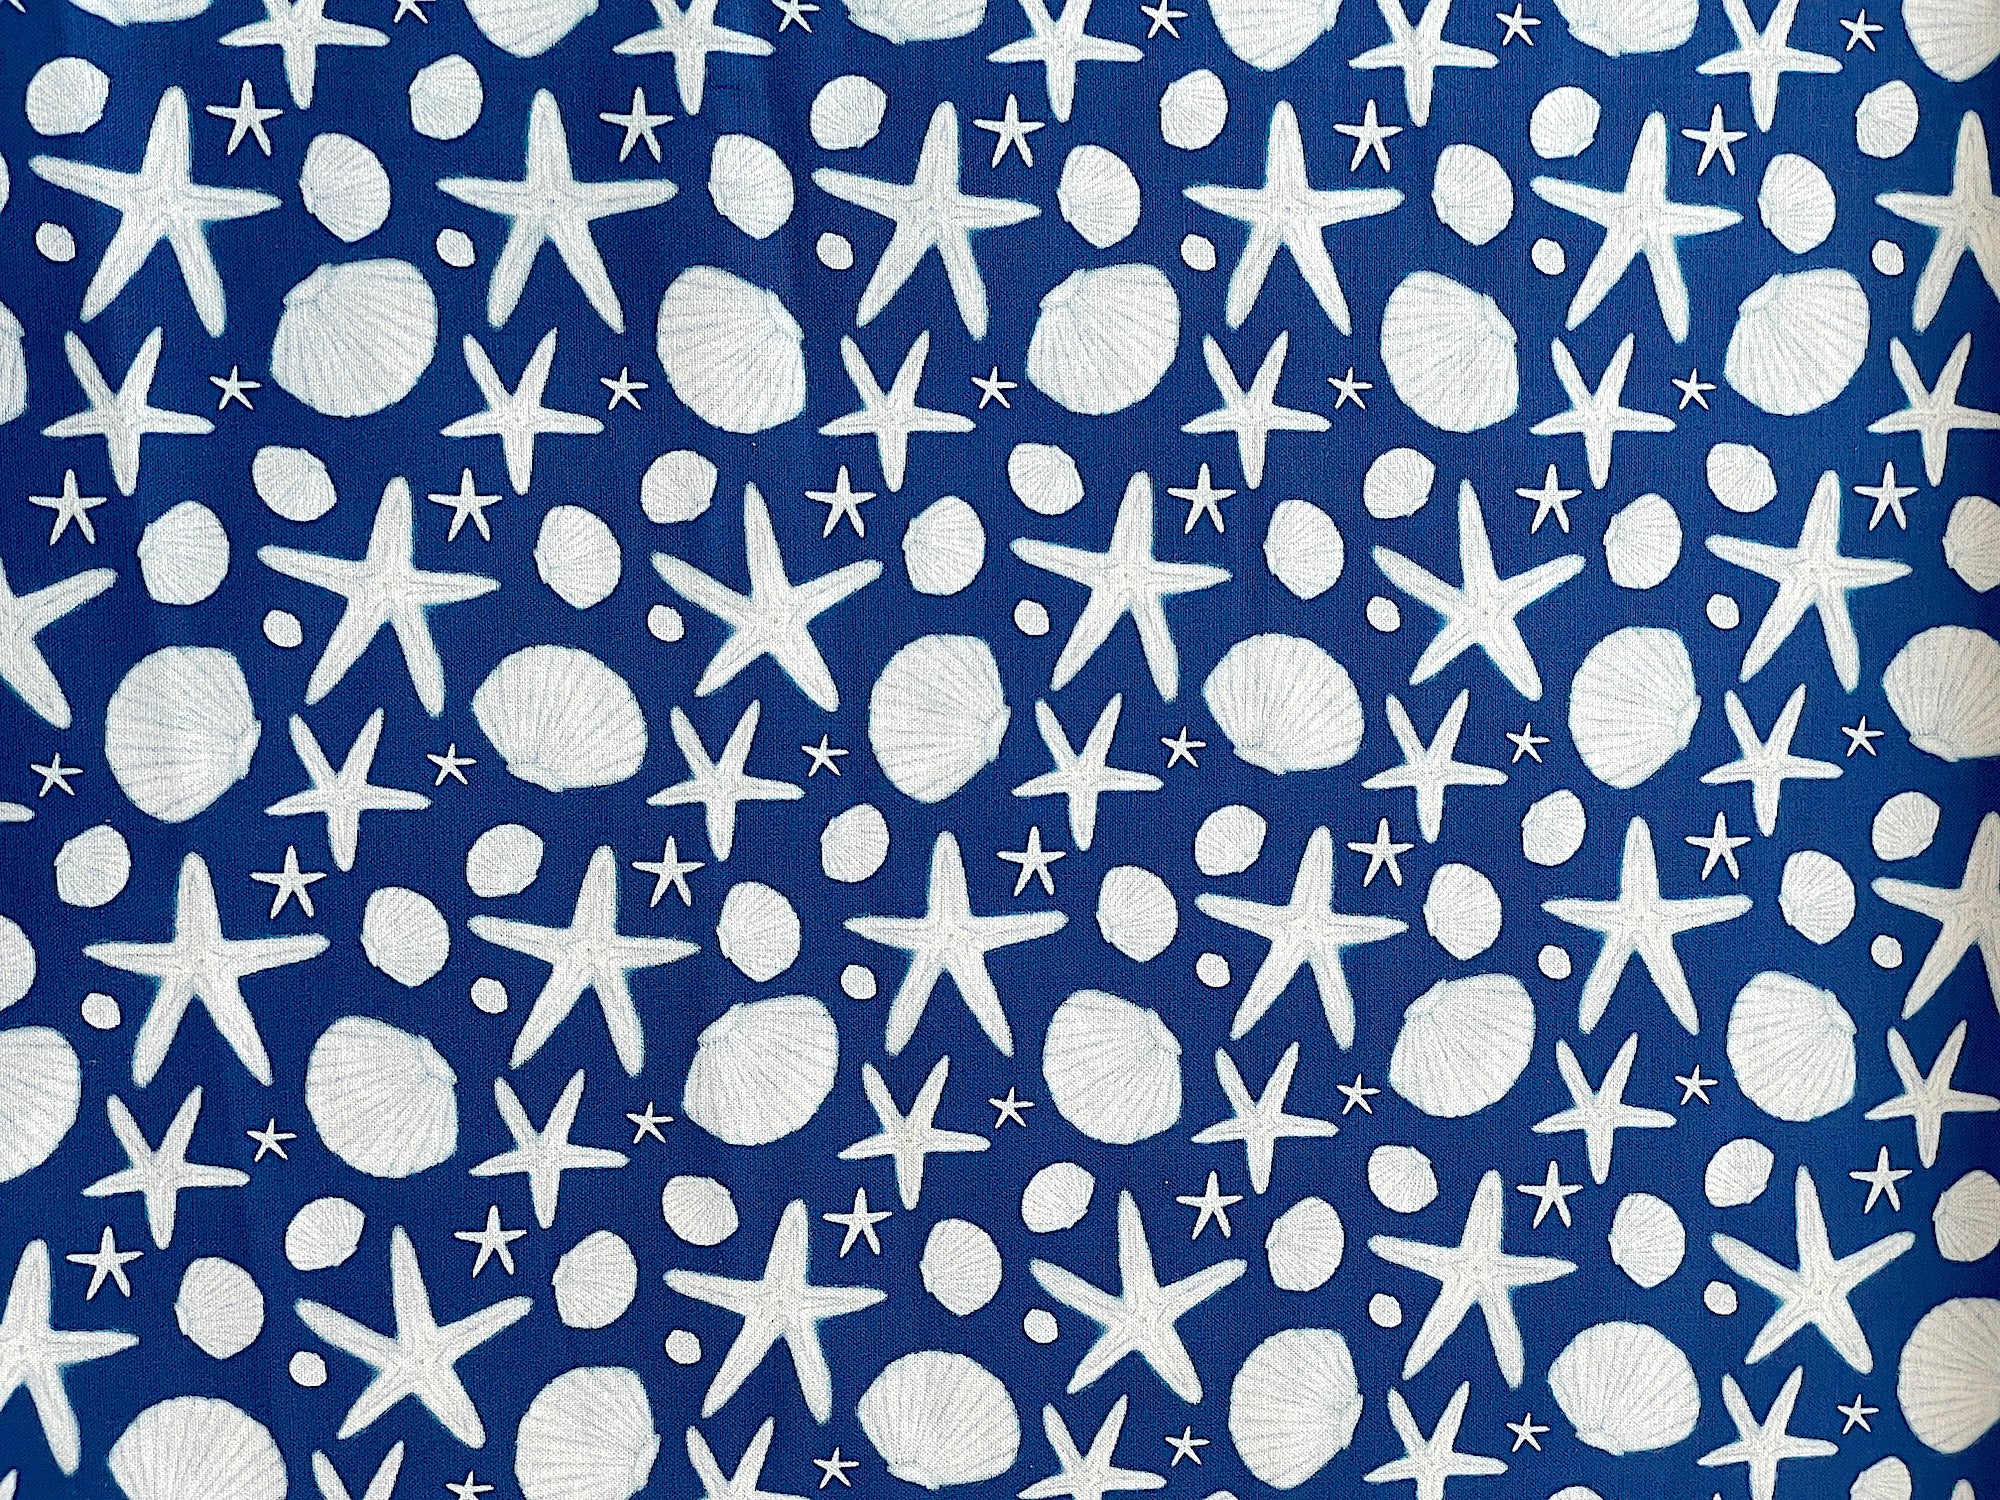 Cotton fabric covered with white sea shells and starfish.